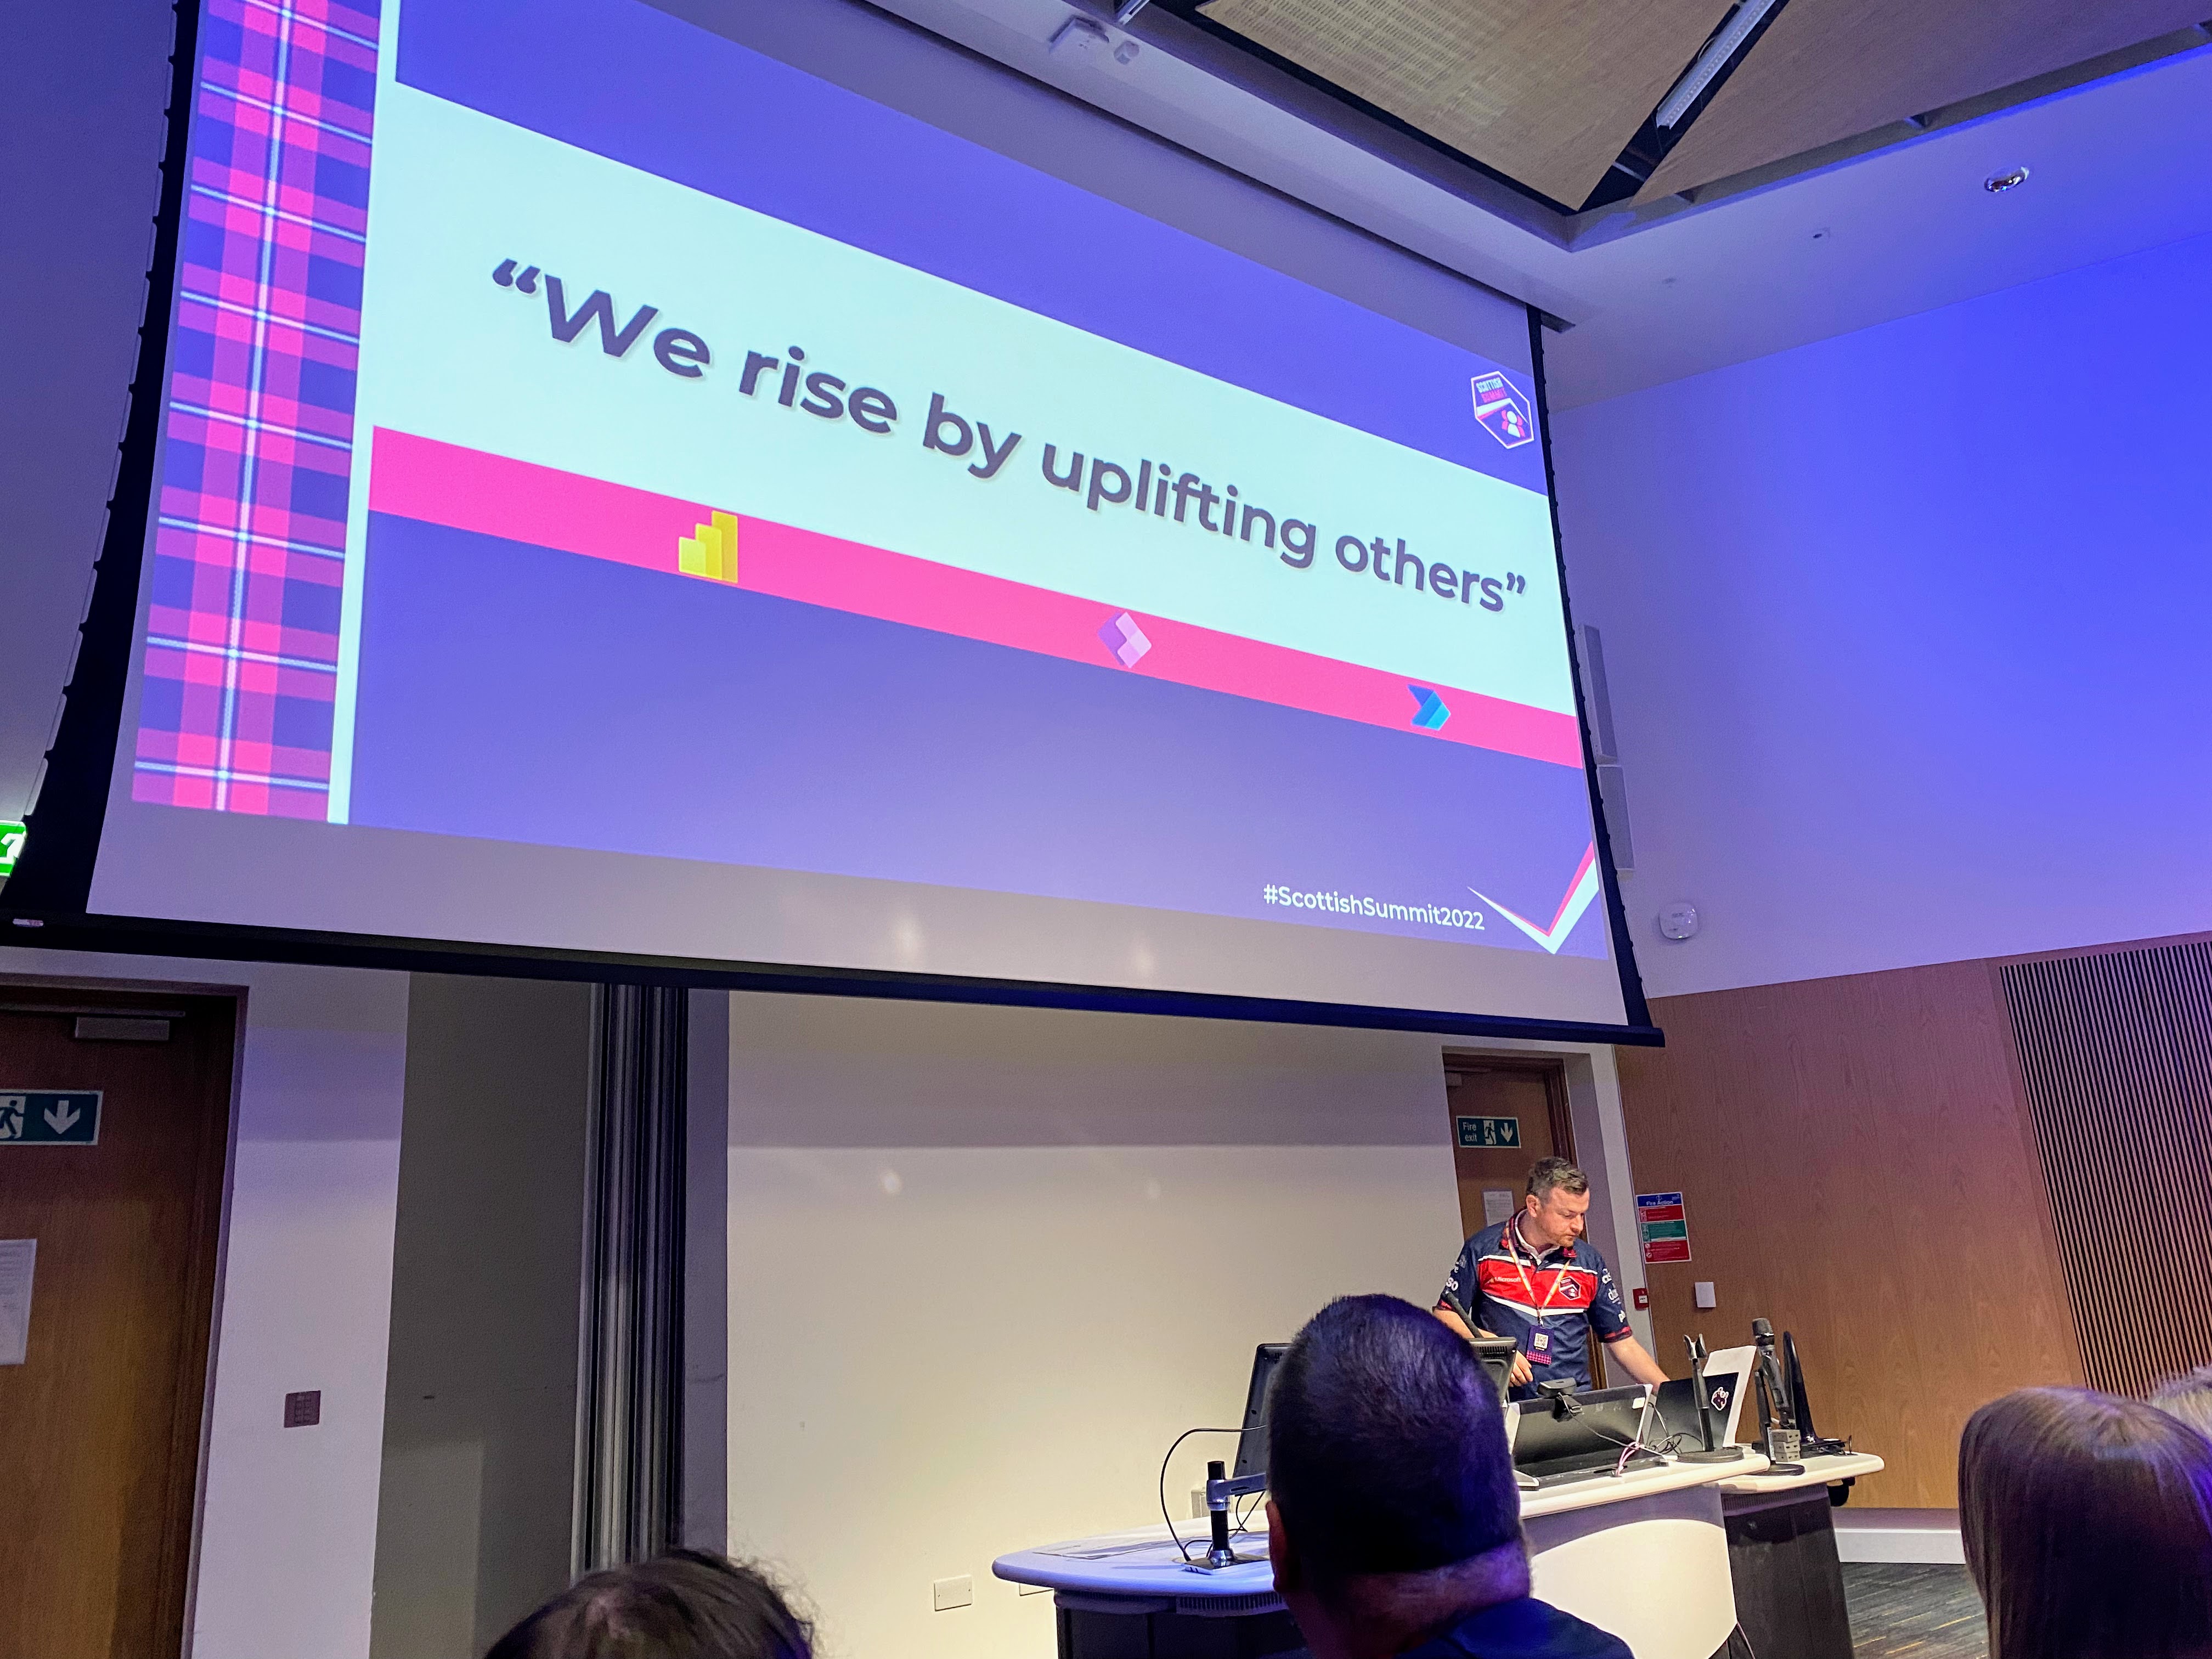 Connell McGinley giving the keynote session at Scottish Summit 2022 saying we rise by uplifting others